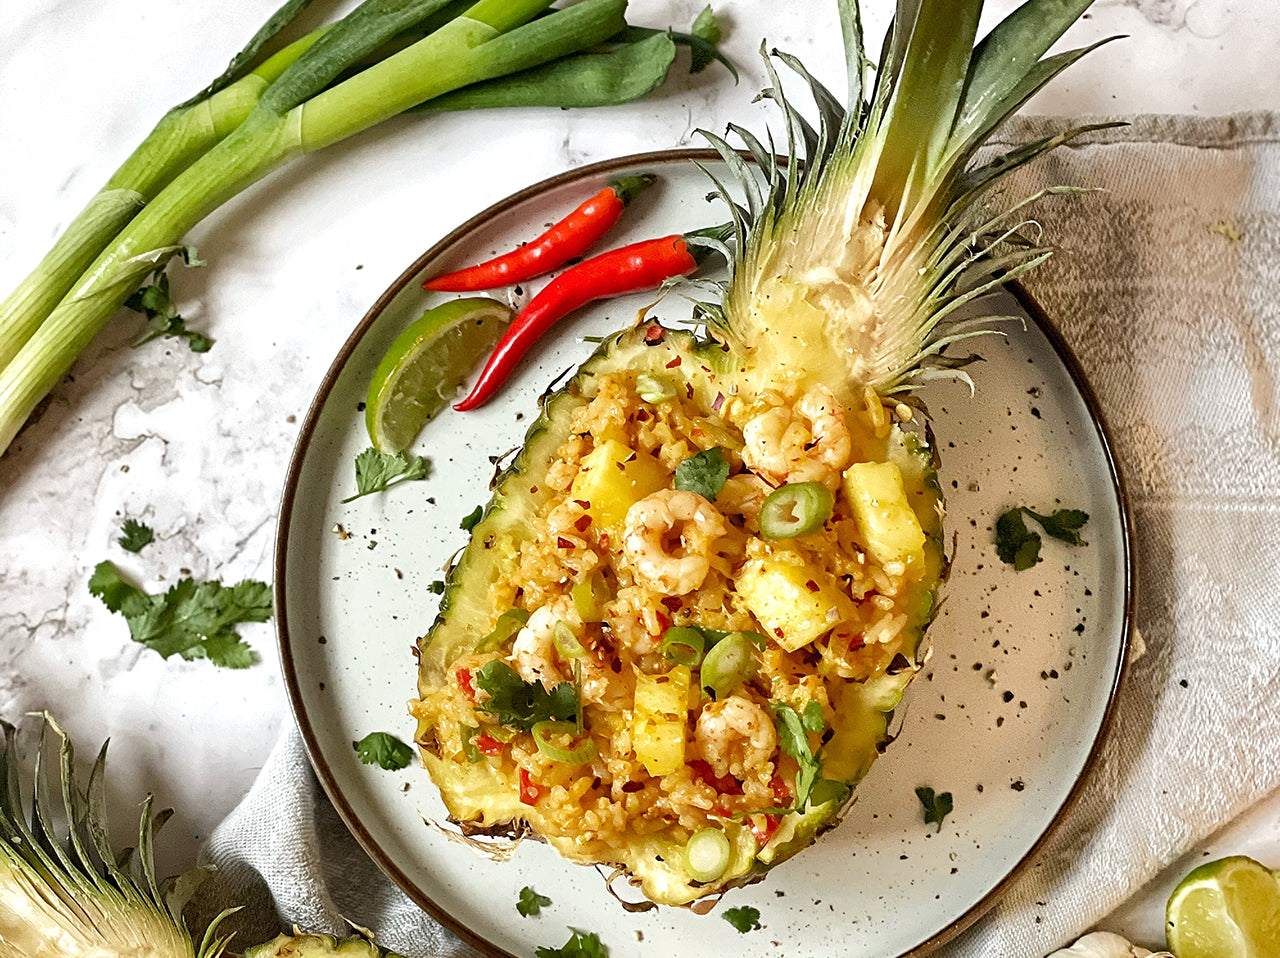 Lia's Spicy Pineapple Fried Rice